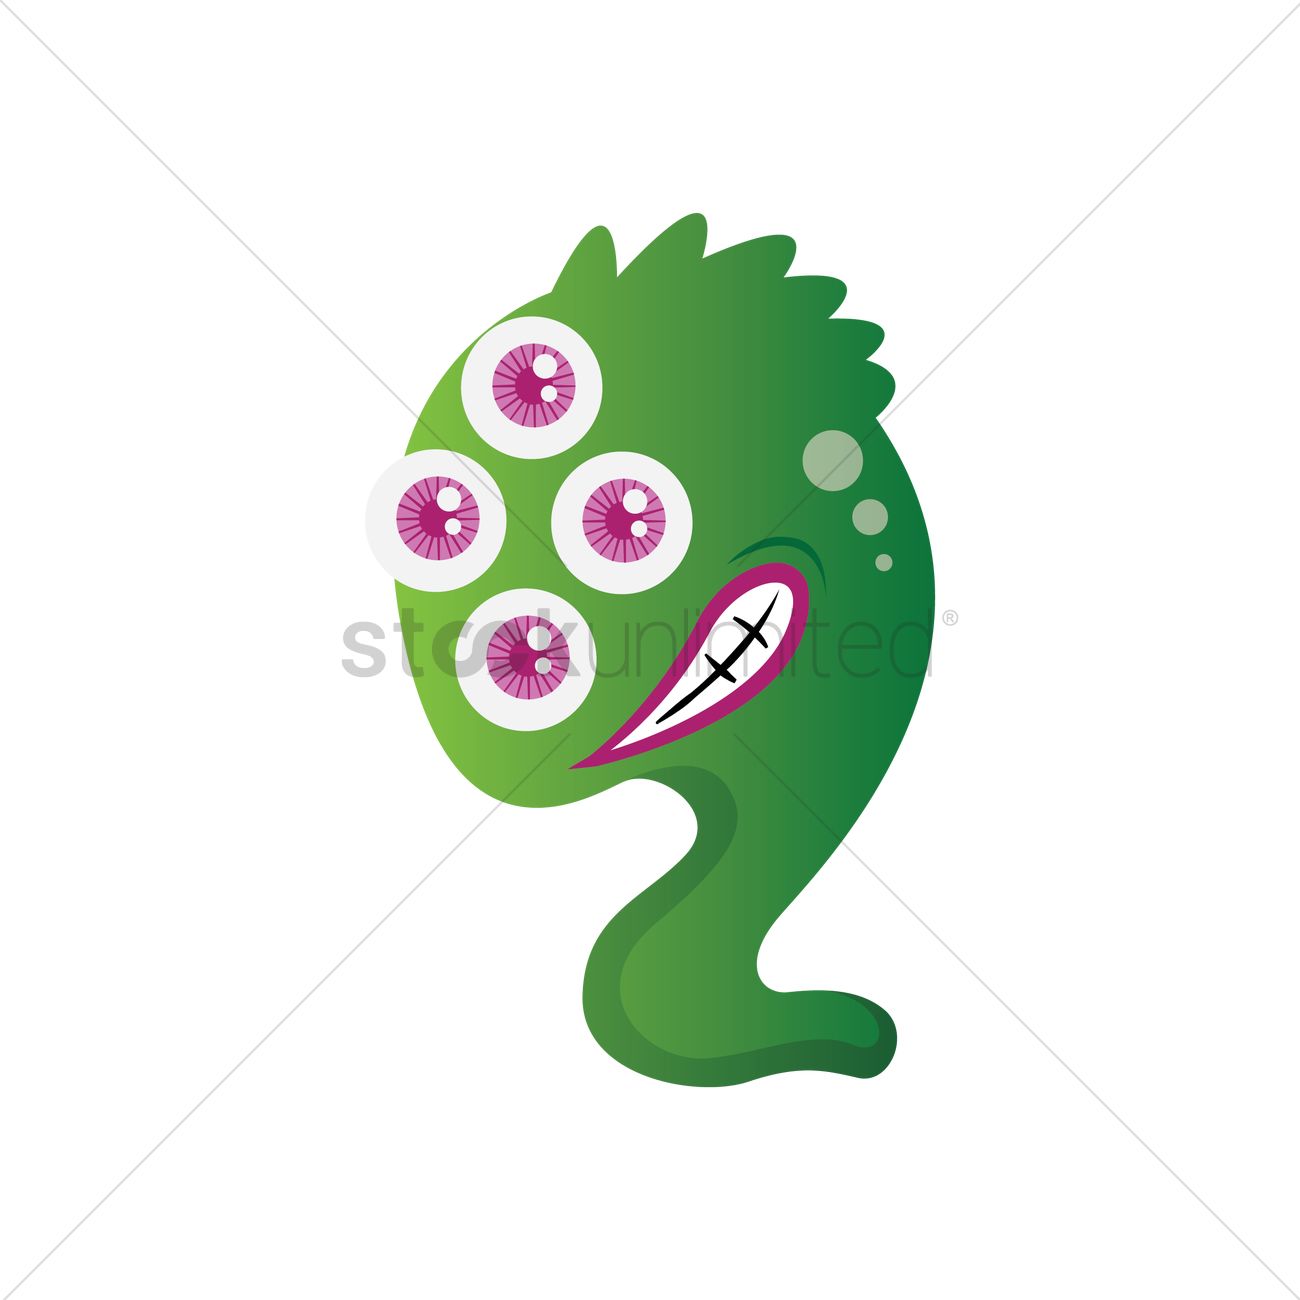 Character Characters Cartoon Monster Monsters One Eyed Three Eyes.